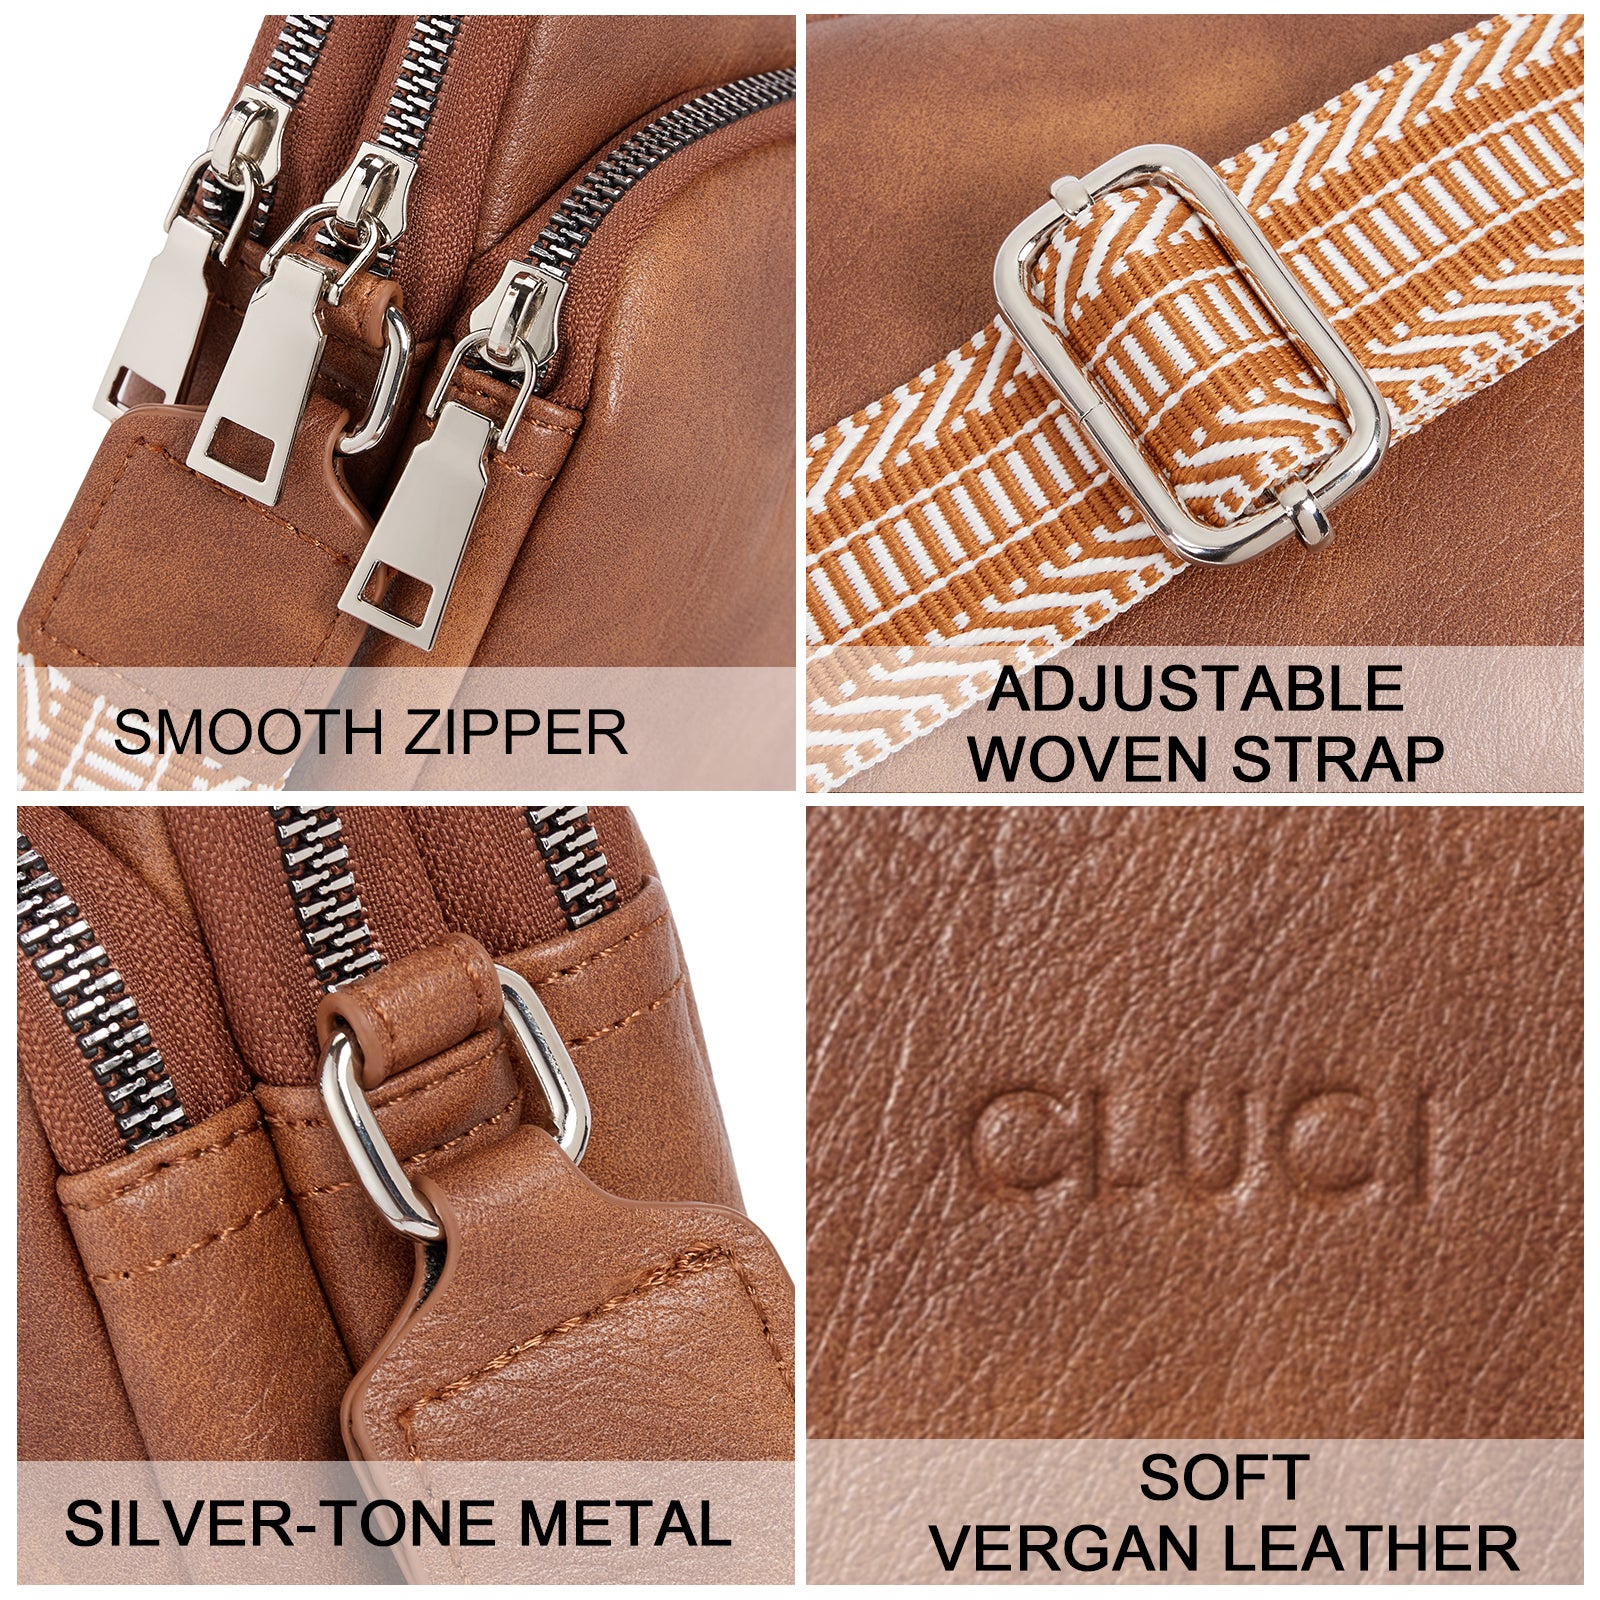 CLUCI Crossbody Bags for Women Small Vegan Leather Cell Phone Purse Shoulder Handbag Wallet with Adjustable Guitar Strap